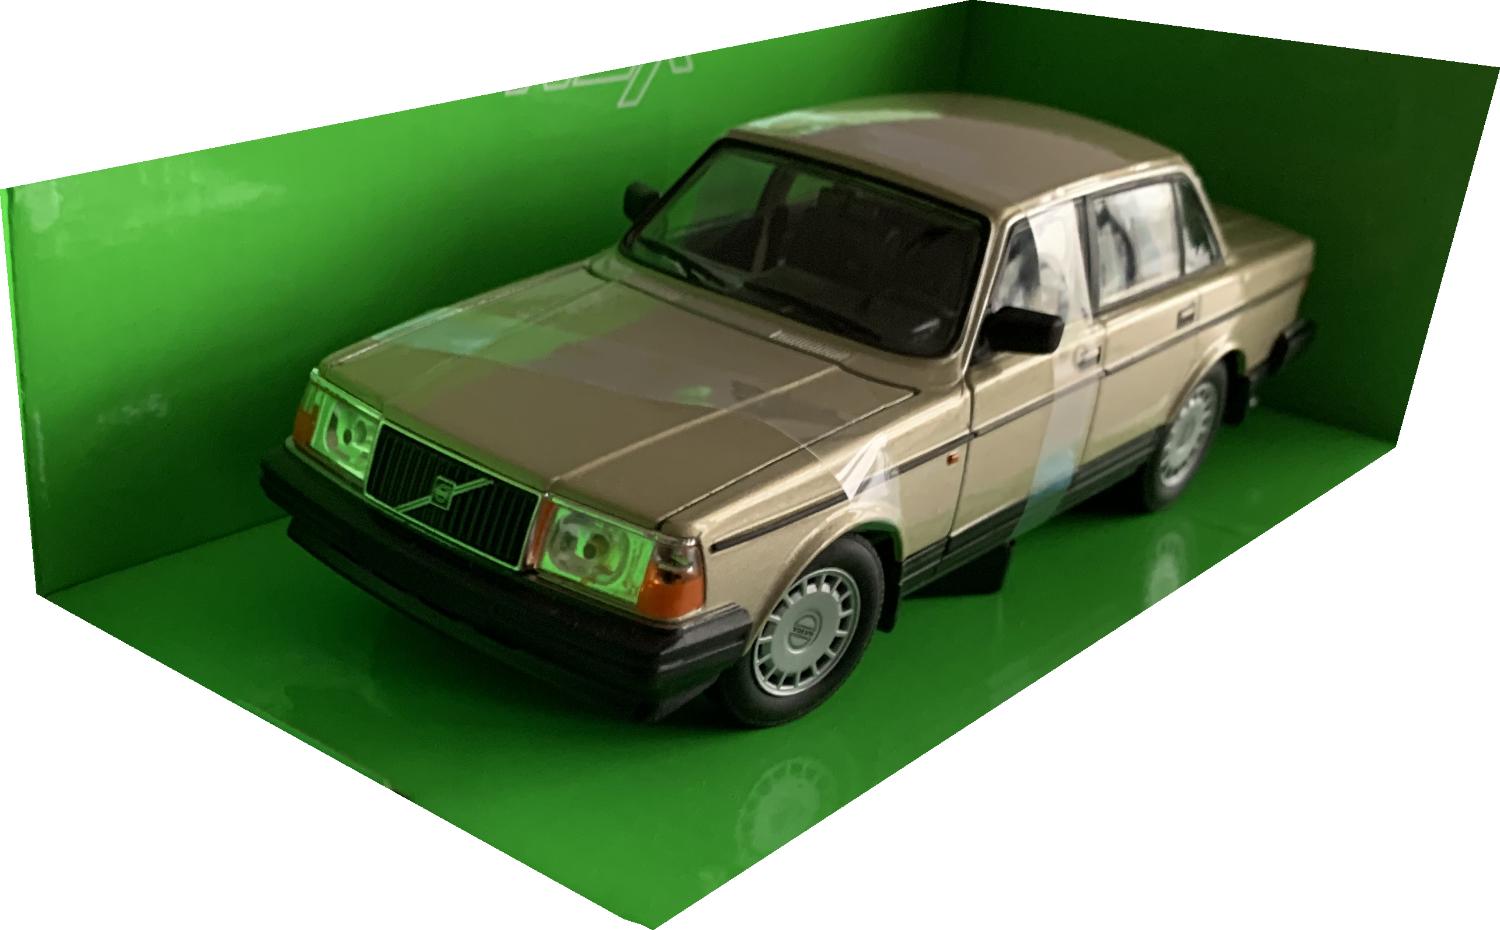 An excellent scale model of a Volvo 240 GL decorated in gold with silver wheels